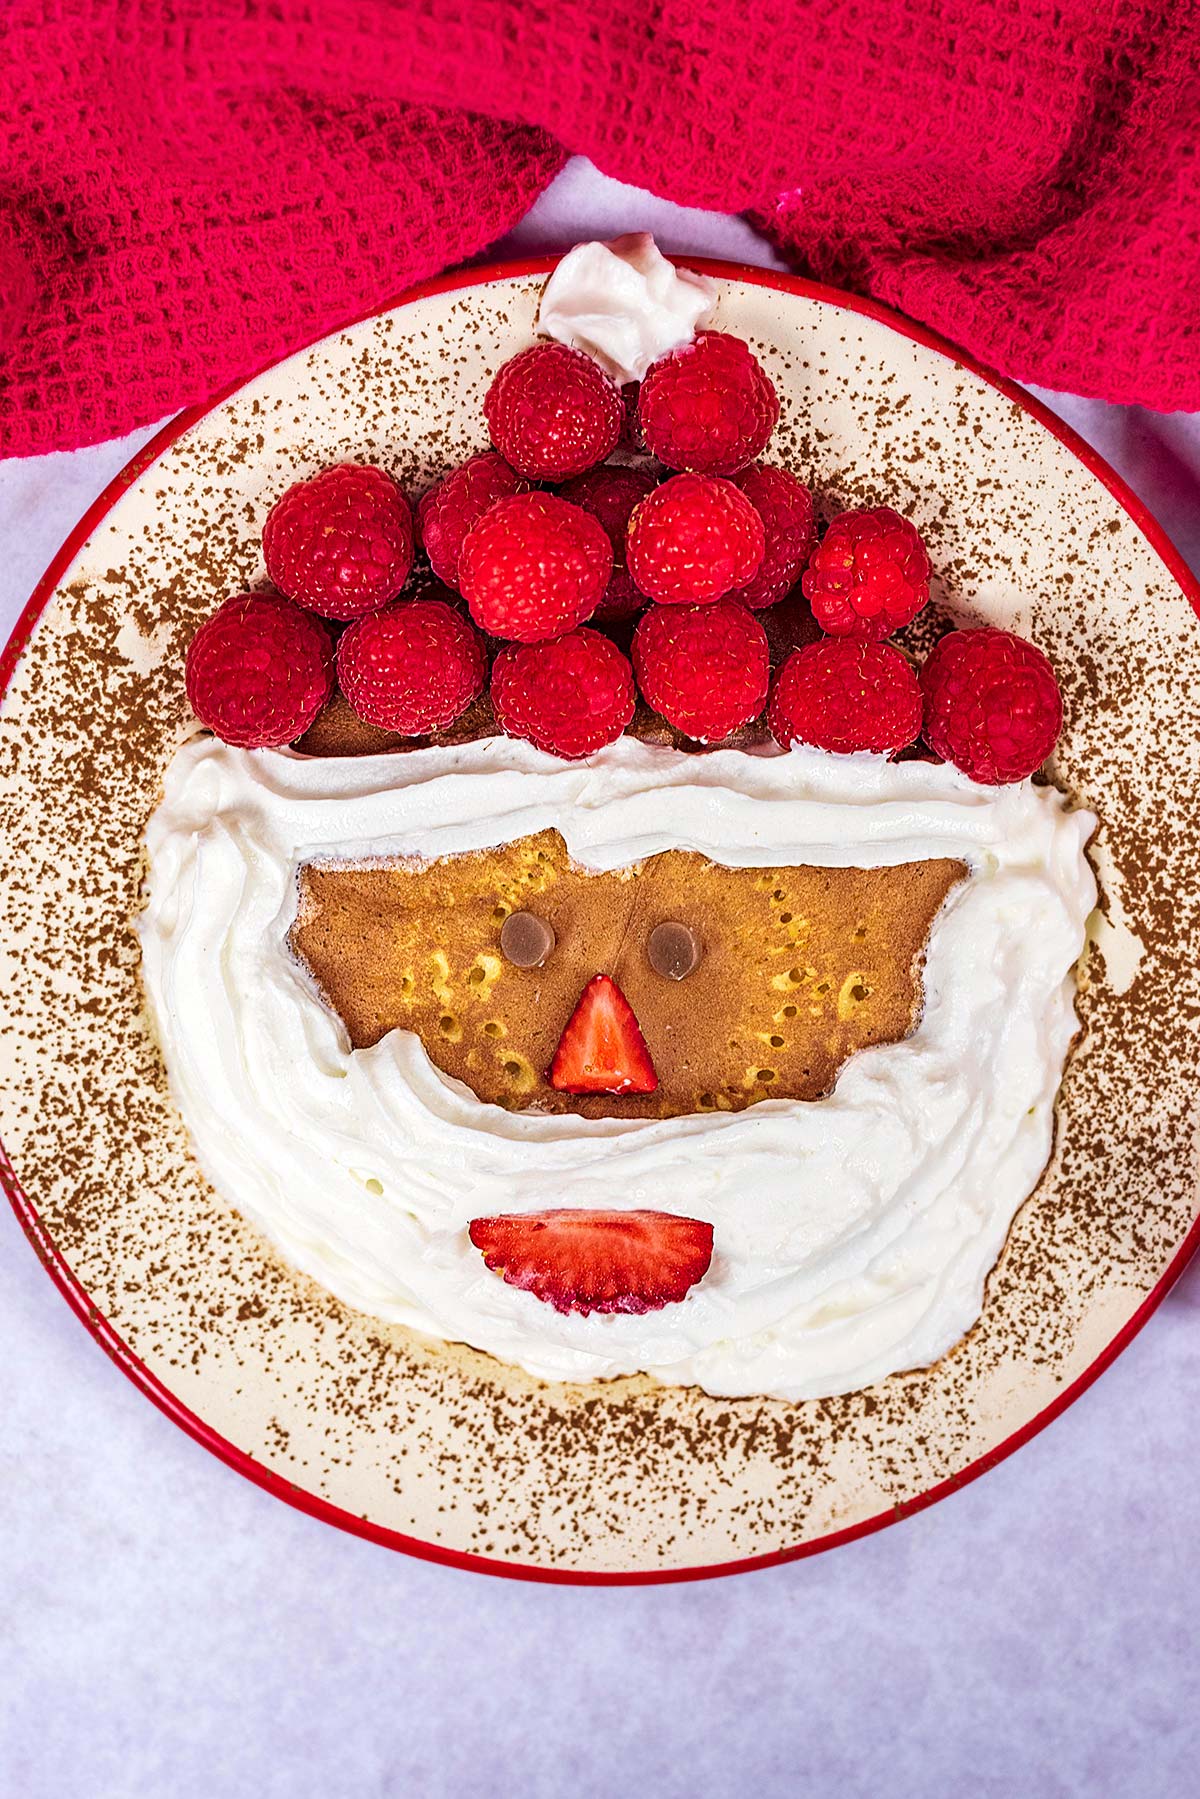 A Santa Claus pancake with raspberries for a hat and strawberry mouth and nose.